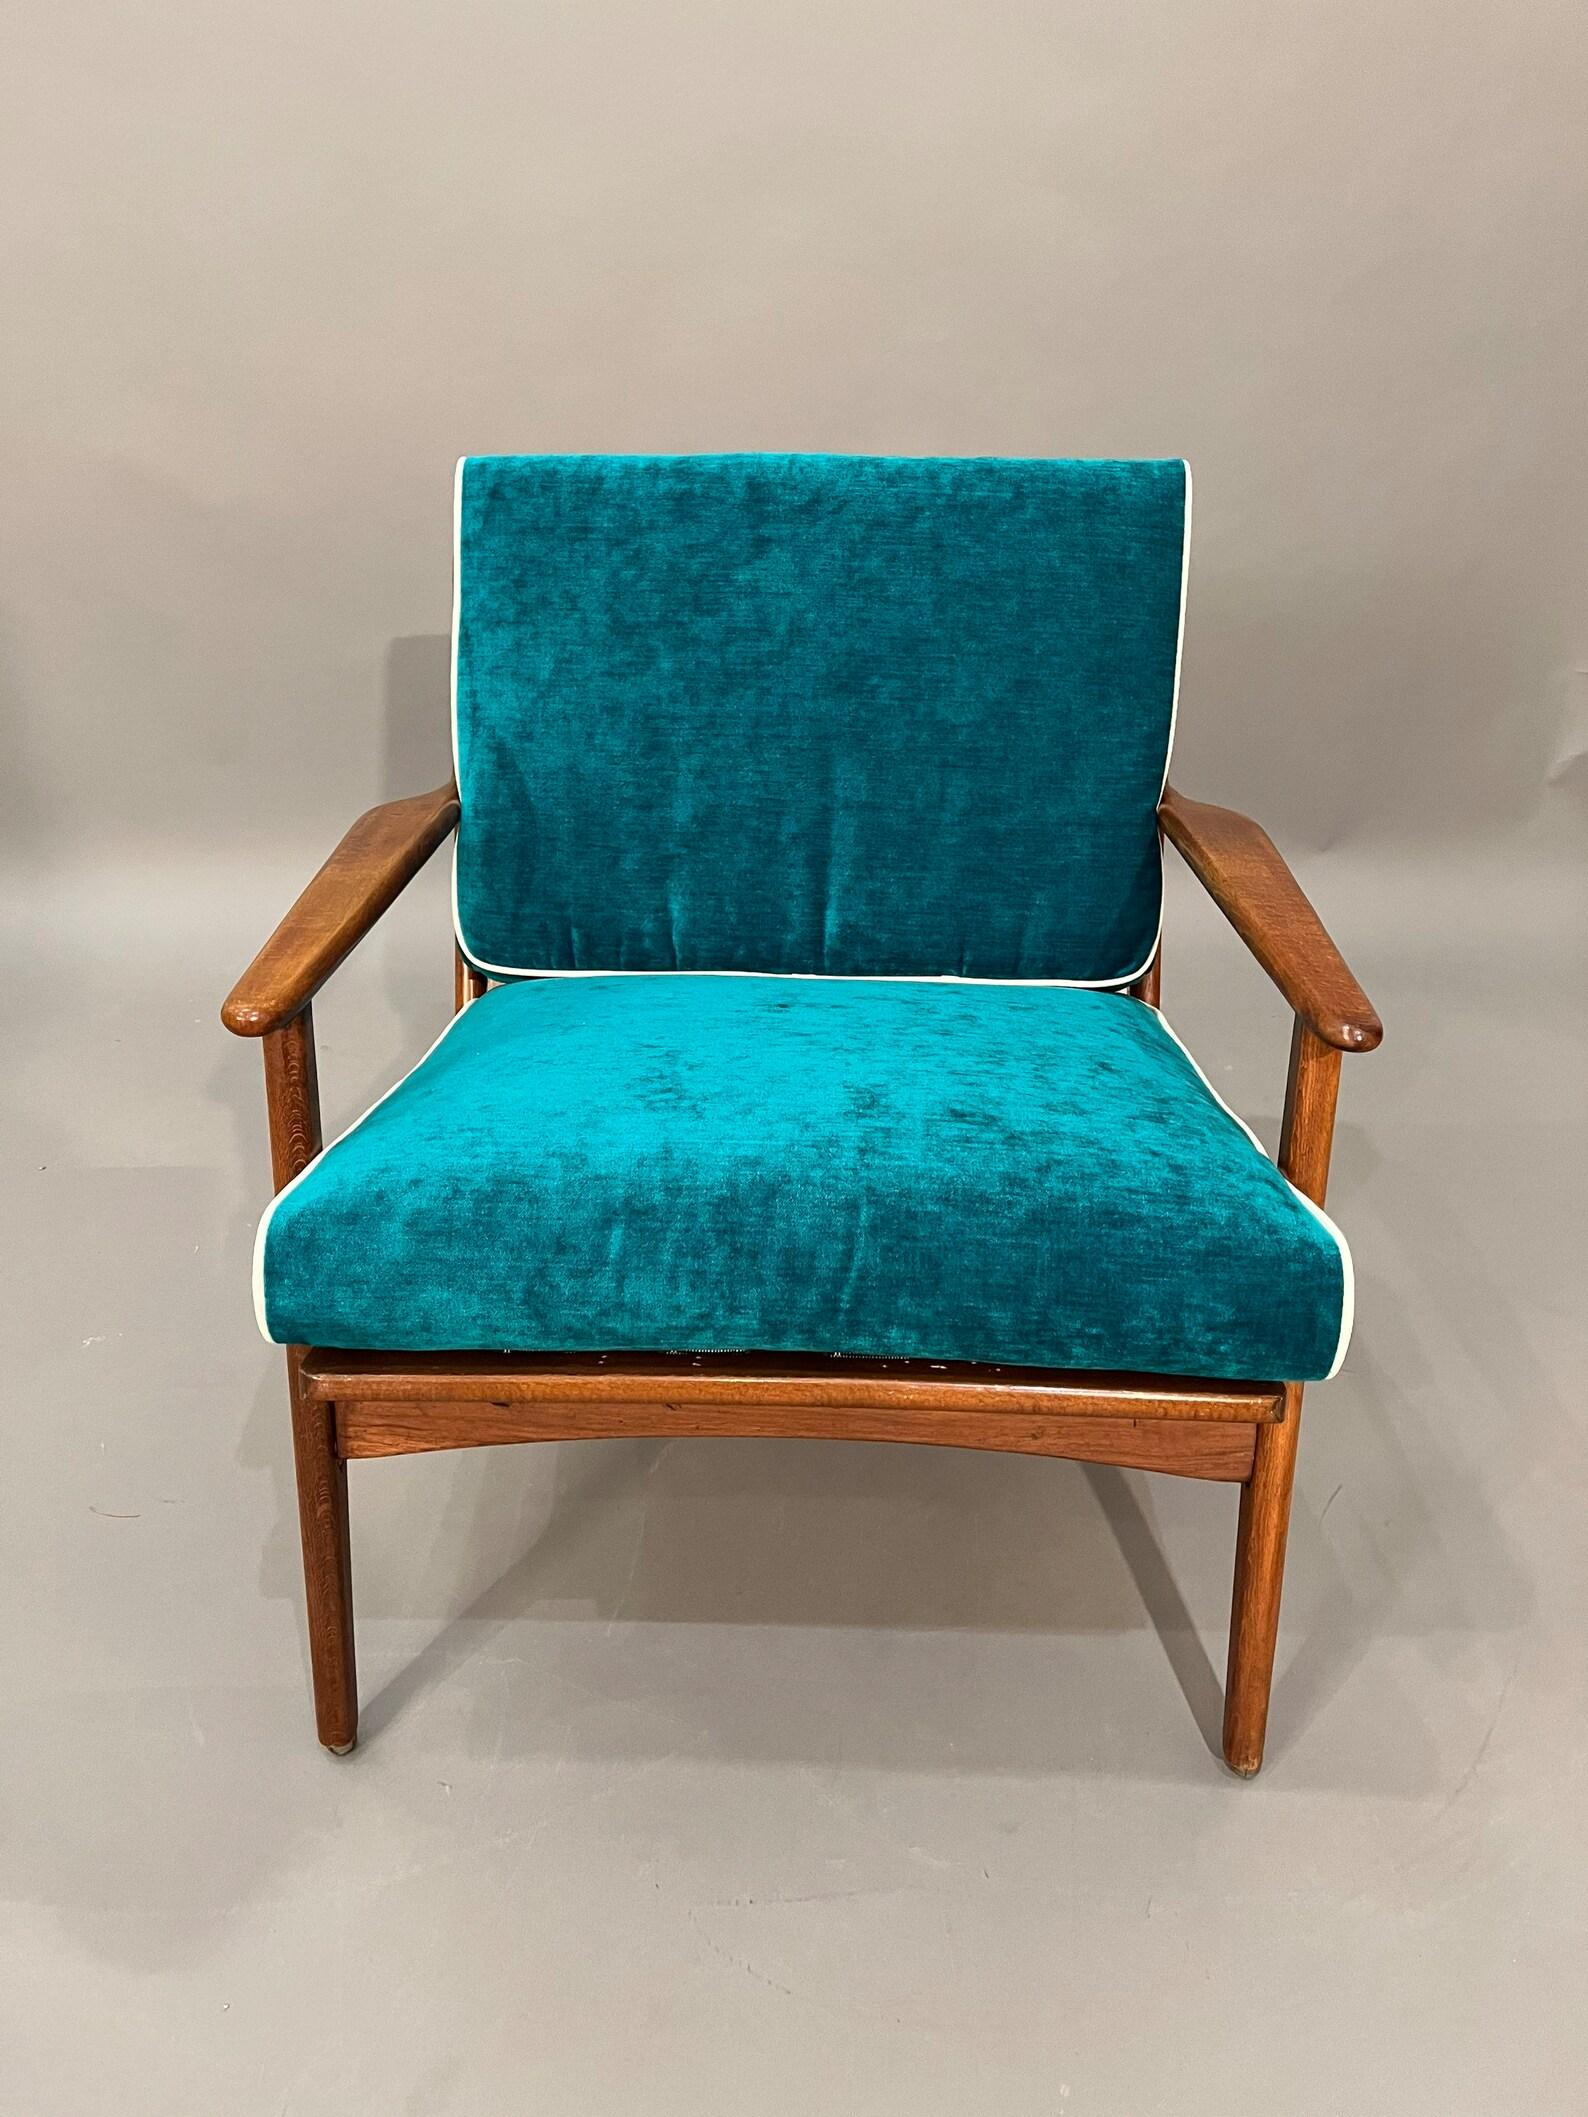 Mid-Century, Curated, Walnut arm lounge chair 1960s Circa completely restored with new cushions with thick blue velvet fabric.

Arm to Arm: 27” inches 
Interior depth: 20” inches 
Cushions thickness: 3.5” inches 
Seat hight: 16” inches 
Arms height: